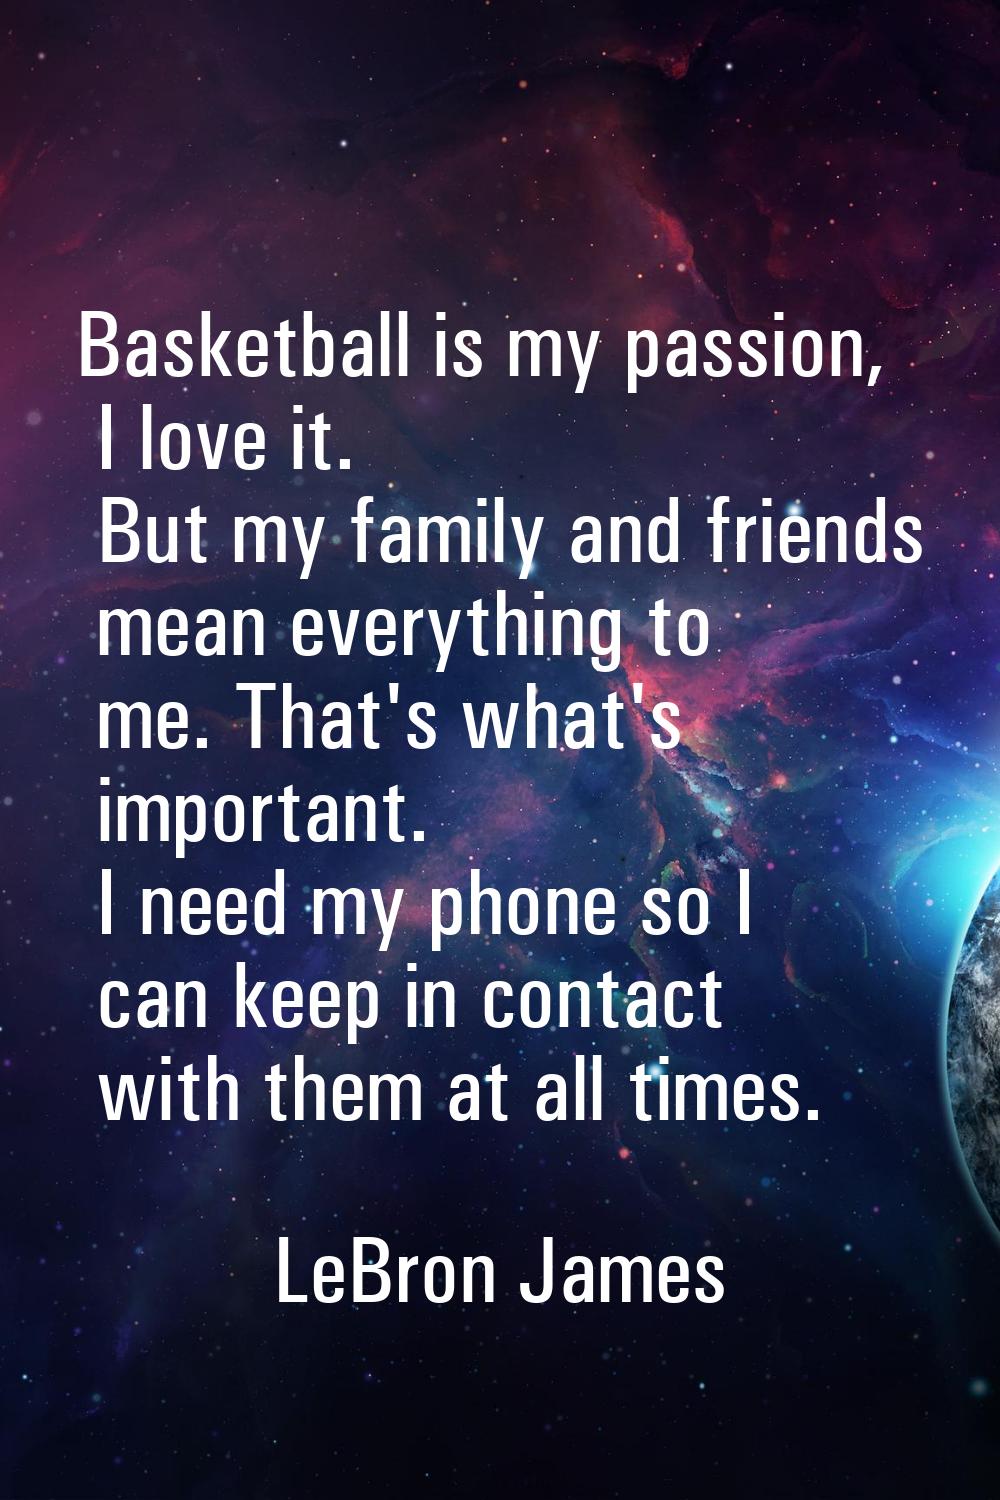 Basketball is my passion, I love it. But my family and friends mean everything to me. That's what's